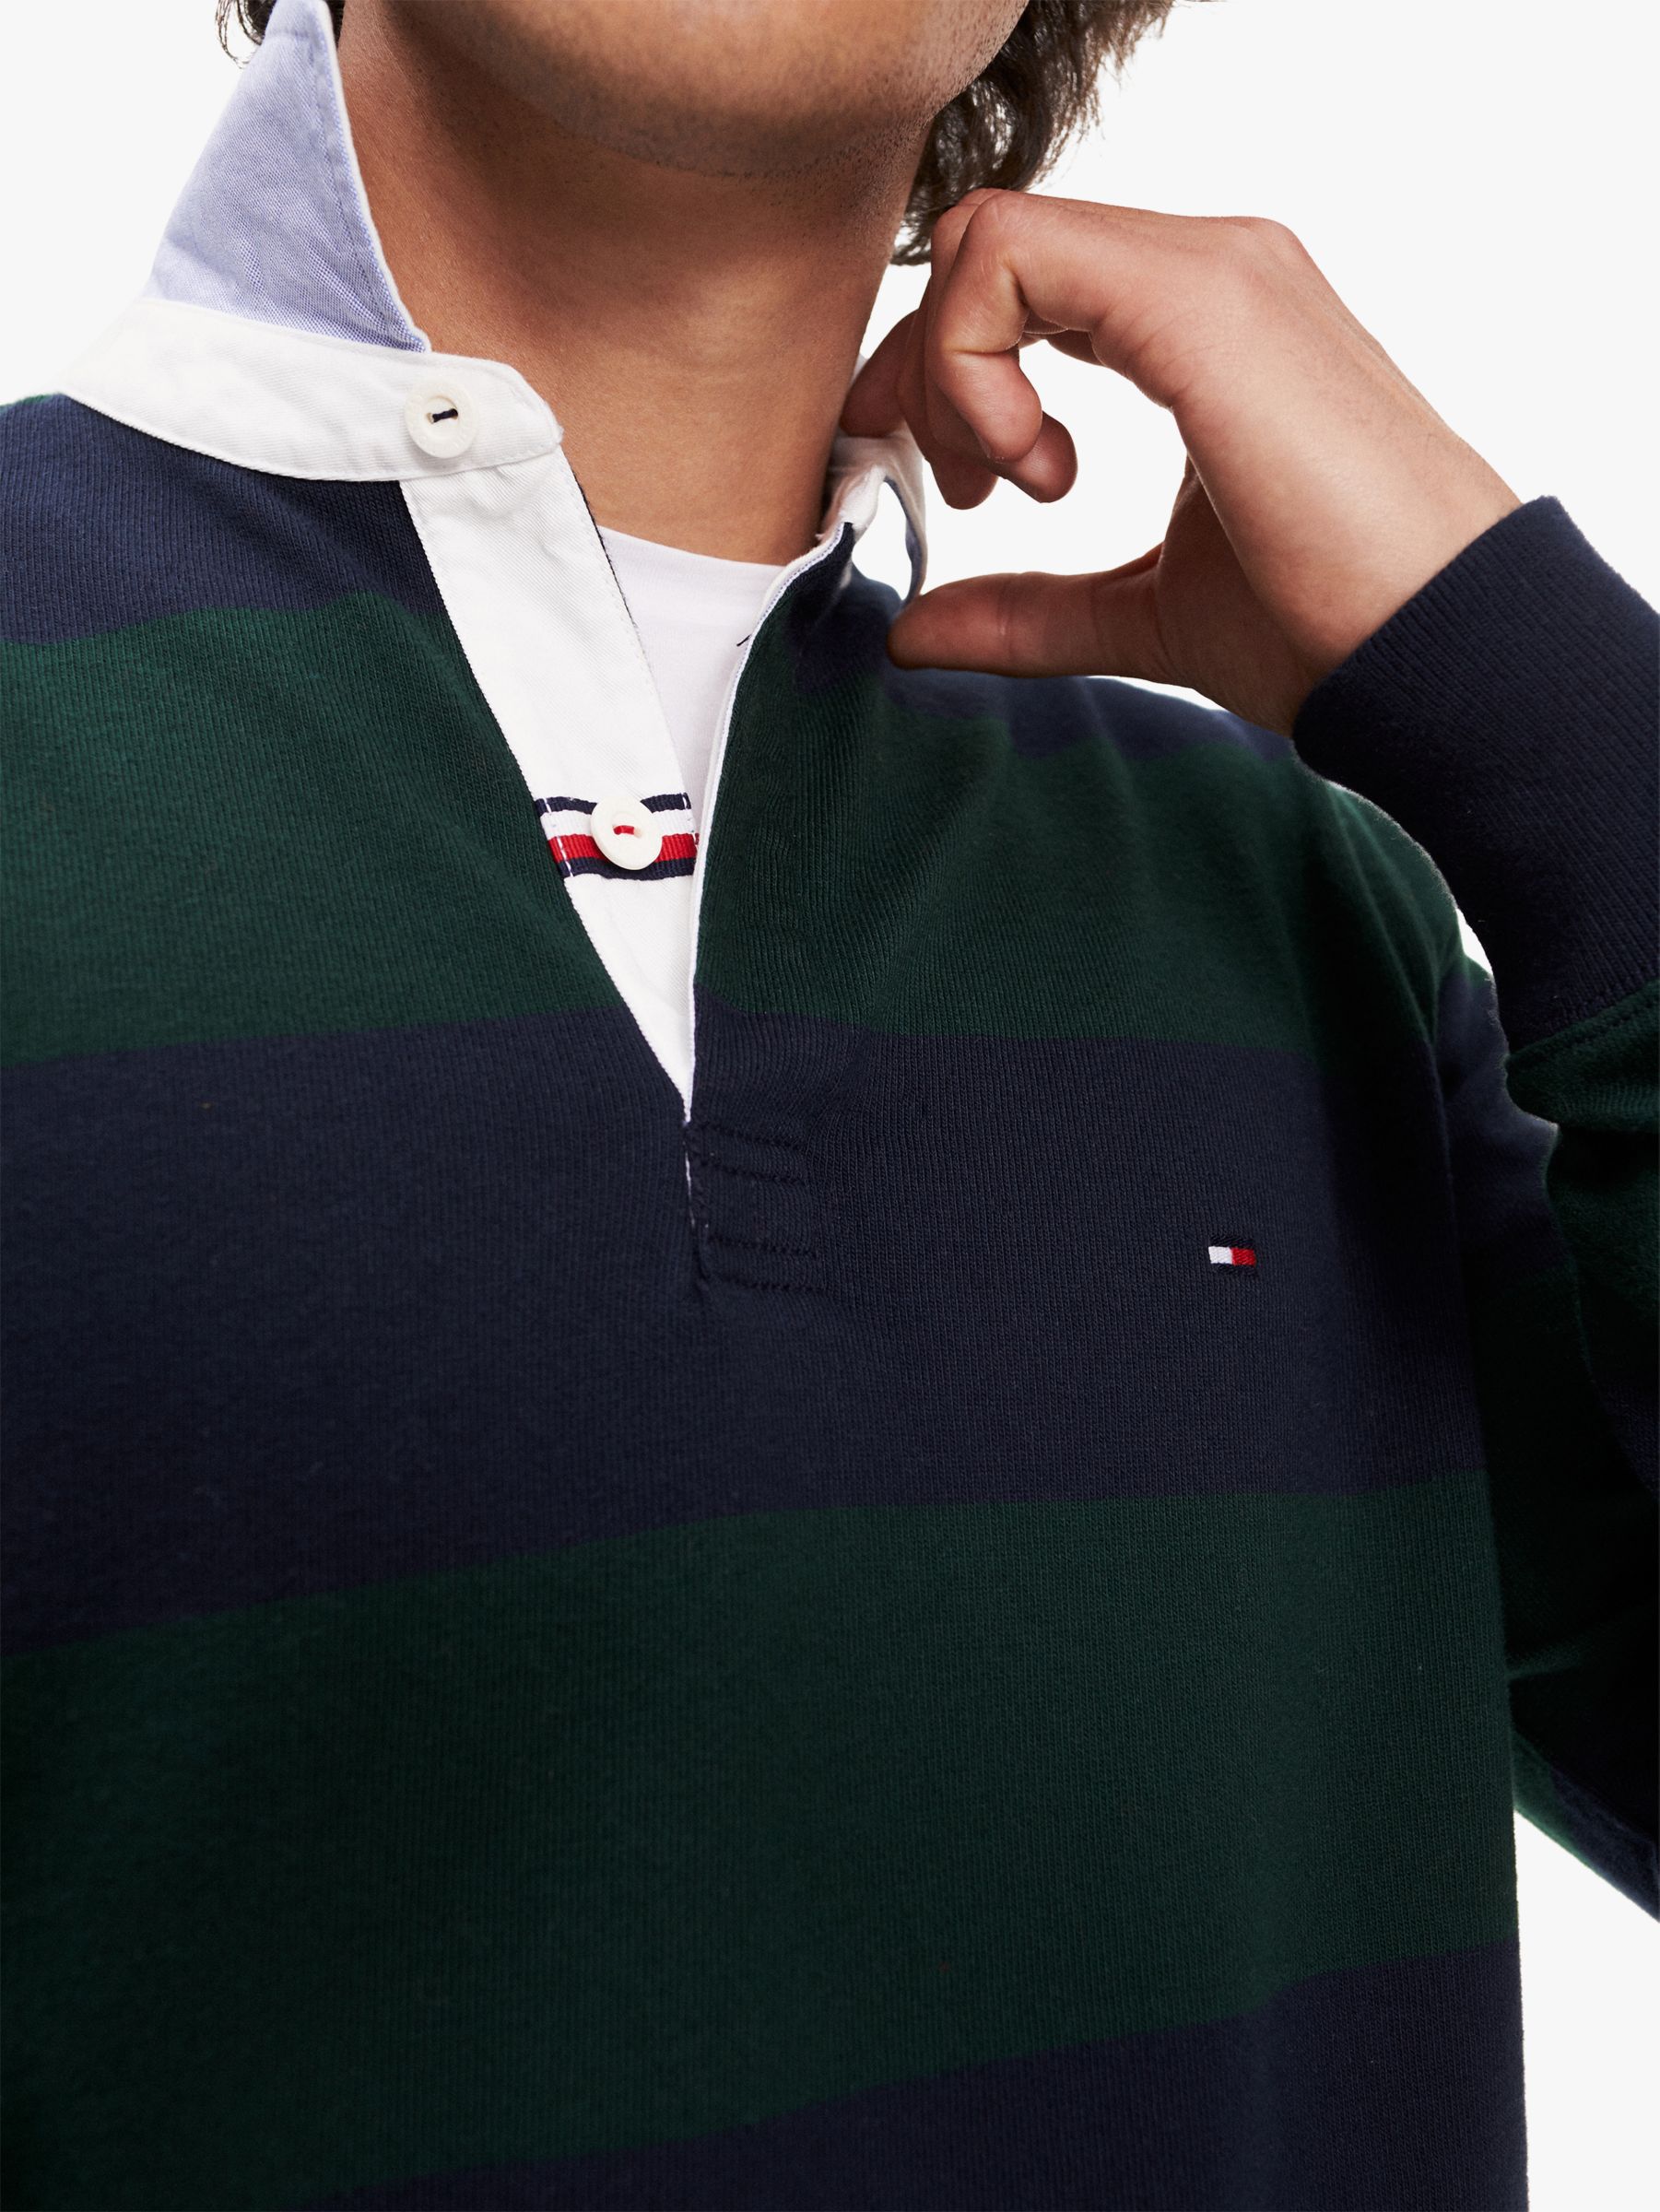 tommy hilfiger iconic rugby shirt